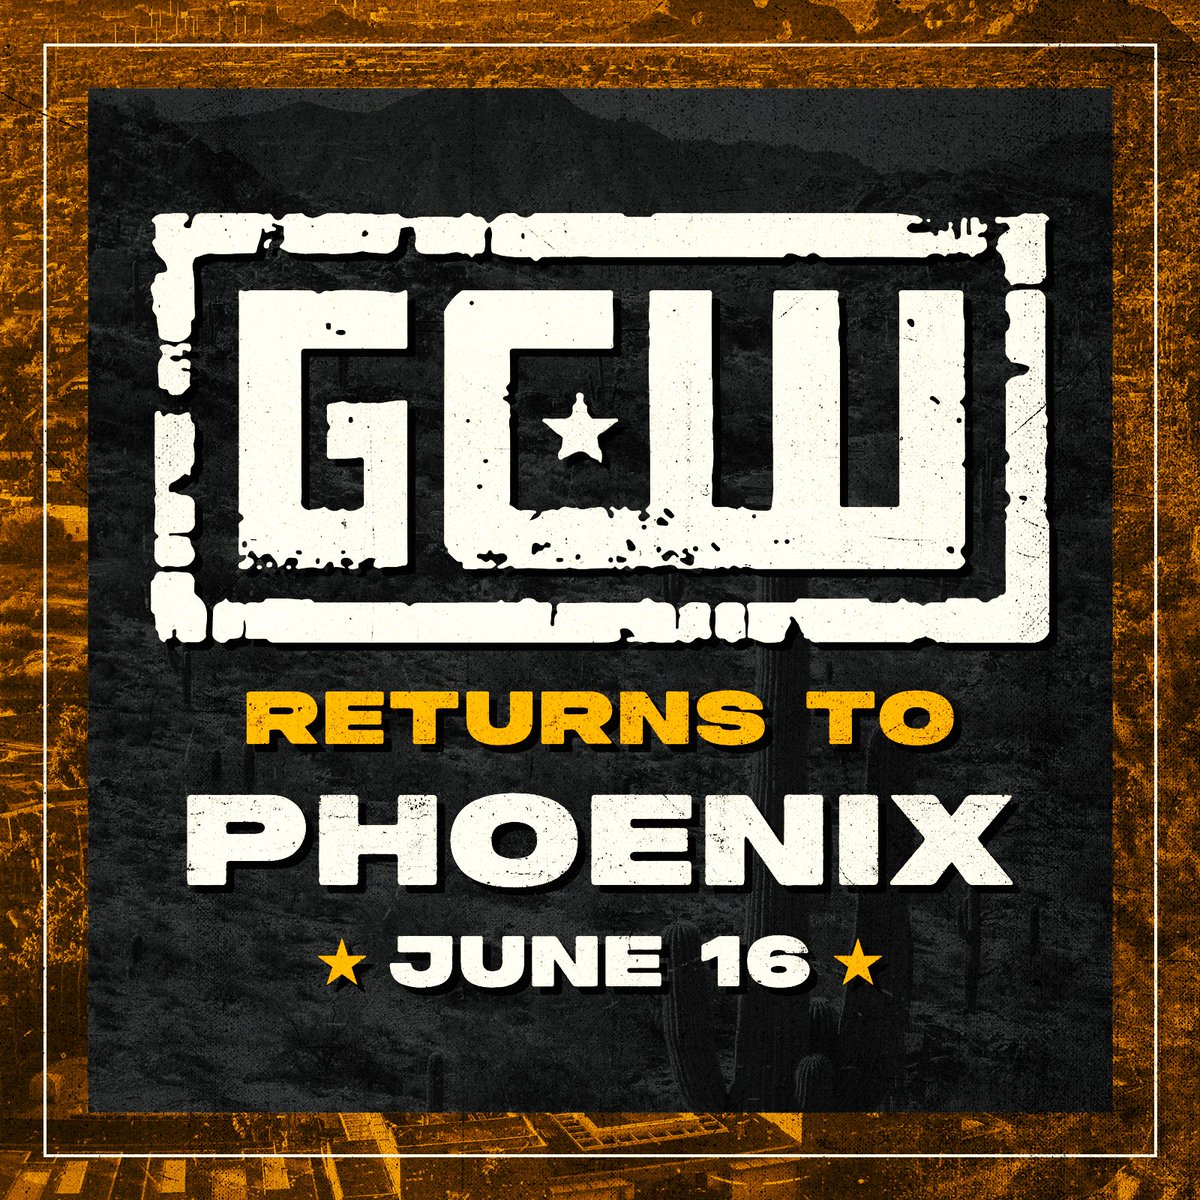 ICYMI Fresh off the heels of a SOLD OUT back to back Doubleheader weekend... GCW returns to: *LOS ANGELES* Saturday, April 20th *PHOENIX* Sunday, June 16th Additional info coming soon...